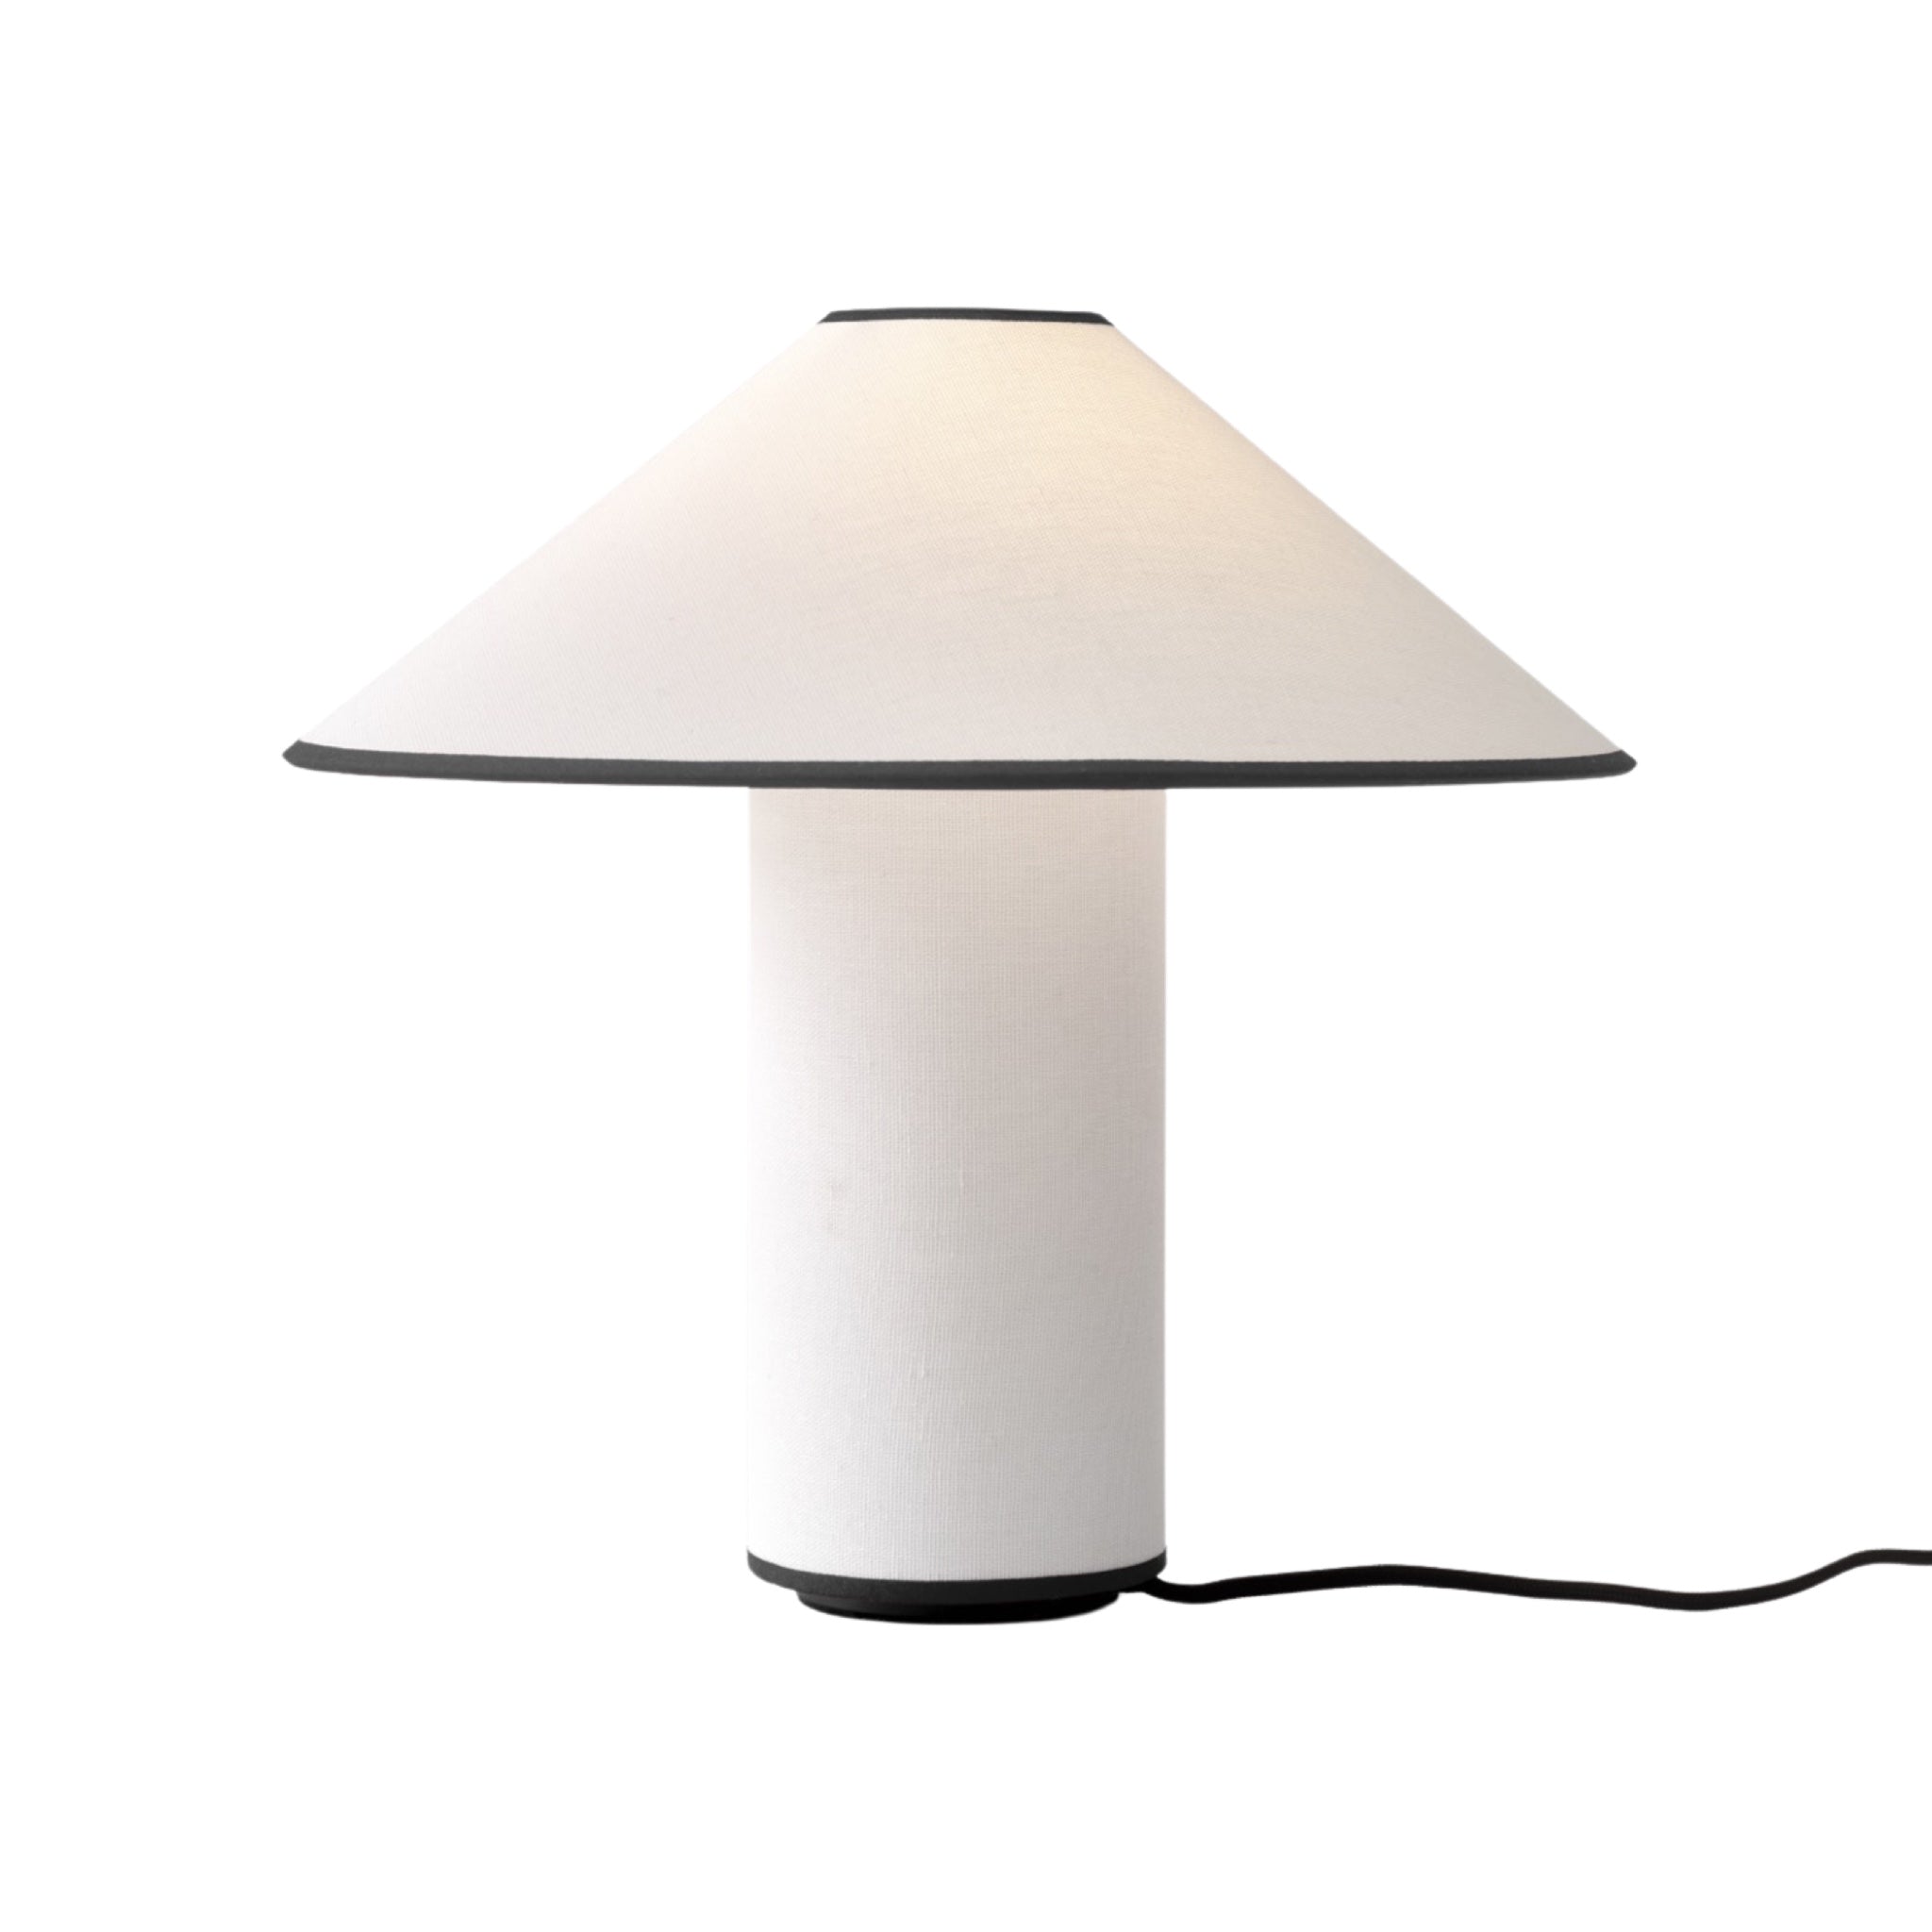 &Tradition Colette Table Lamp